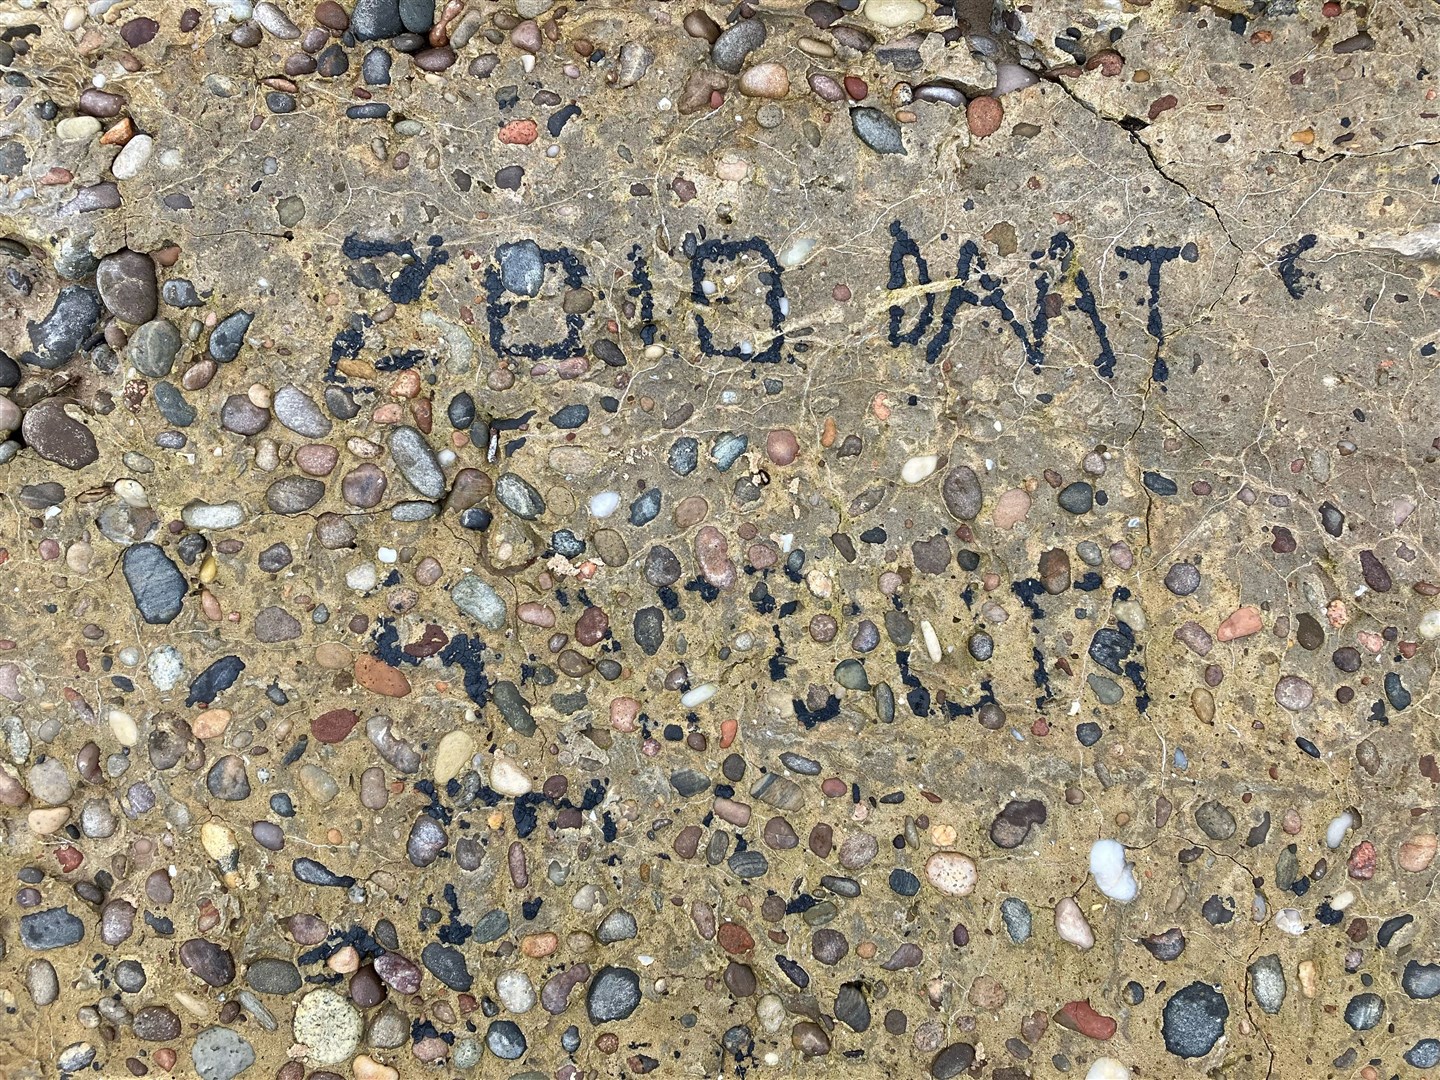 Graffiti on a Roseisle Beach tank trap appears to read "Zoid Daat"...Picture: Peter Adamson